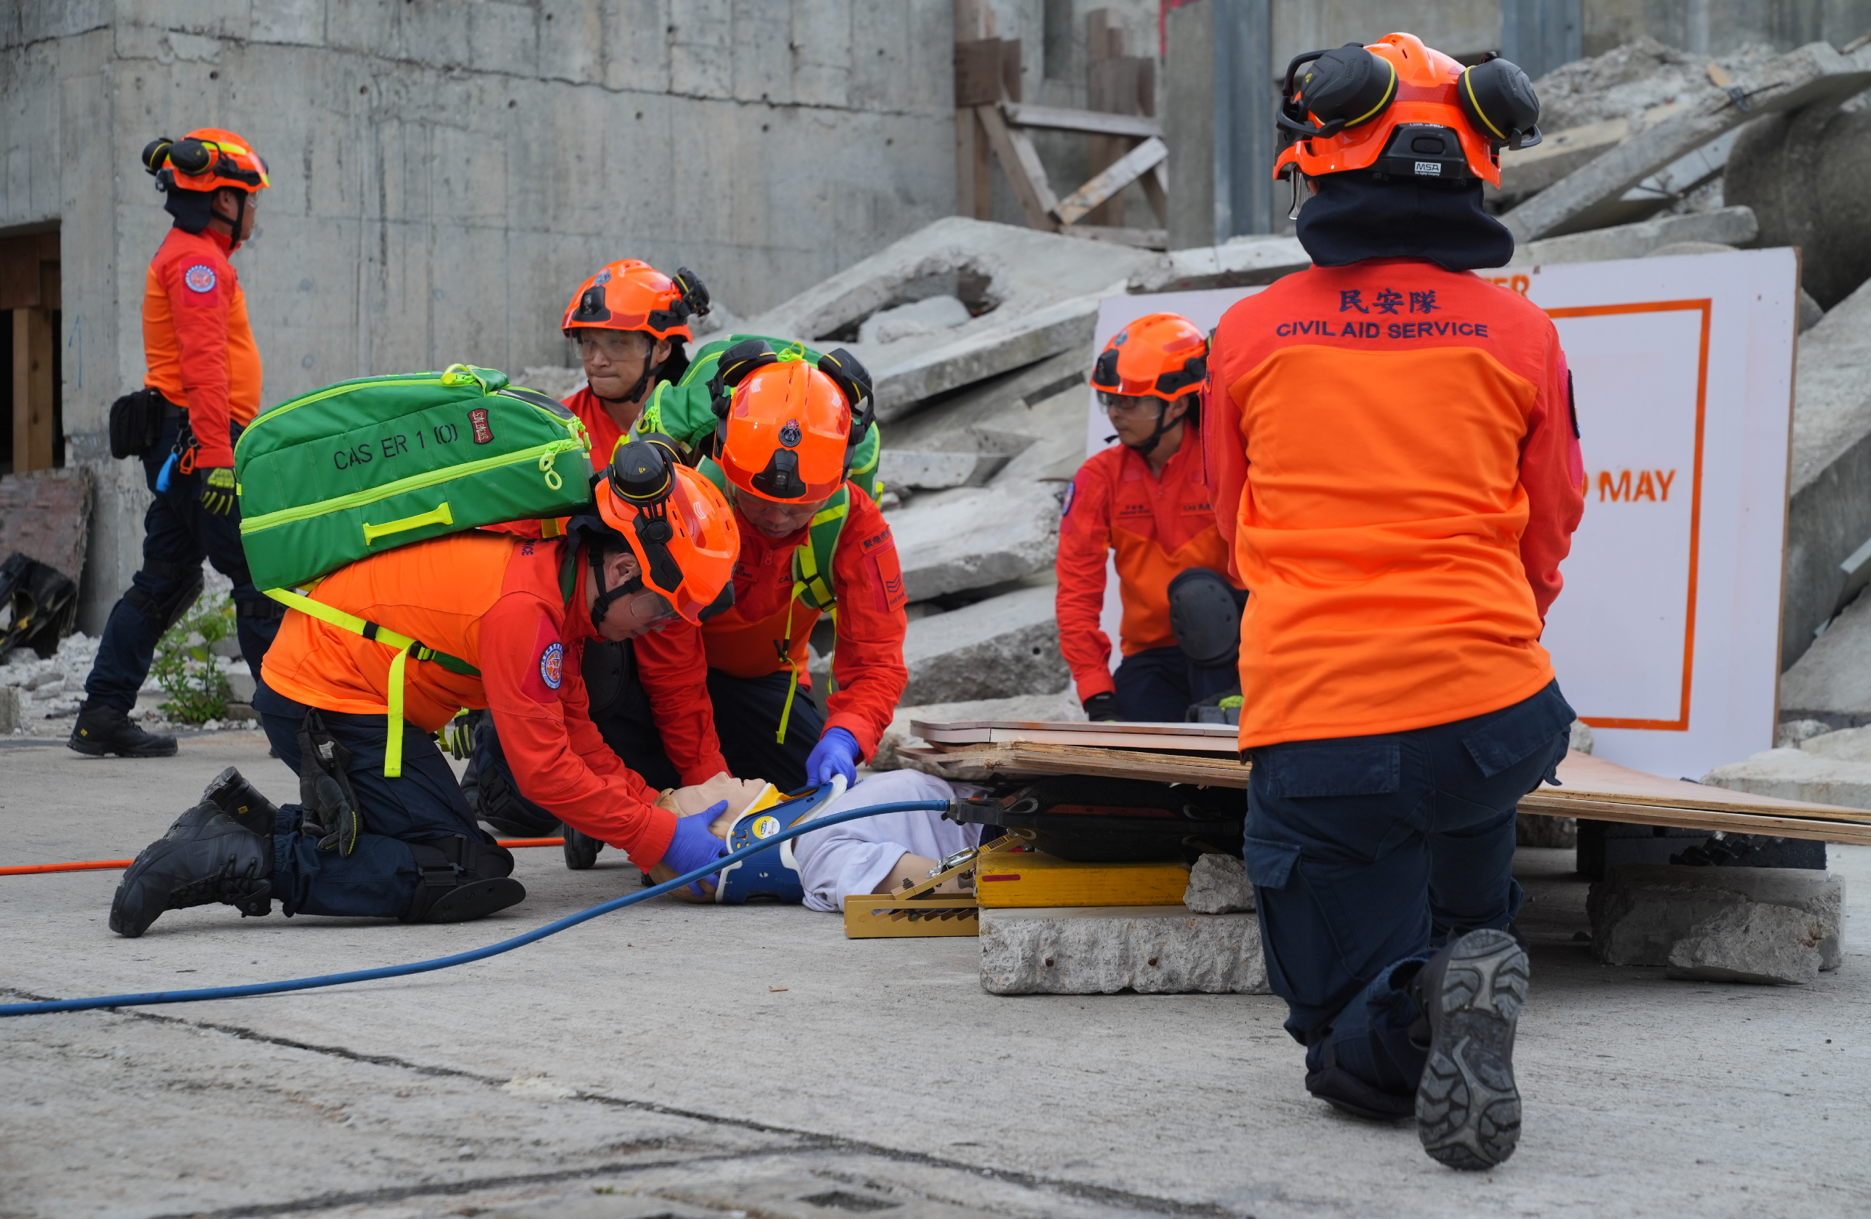 A large-scale exercise held biennially by the Civil Aid Service (CAS) concluded successfully today (May 19). Photo shows CAS members rescuing a victim from a collapsed structure in the exercise.